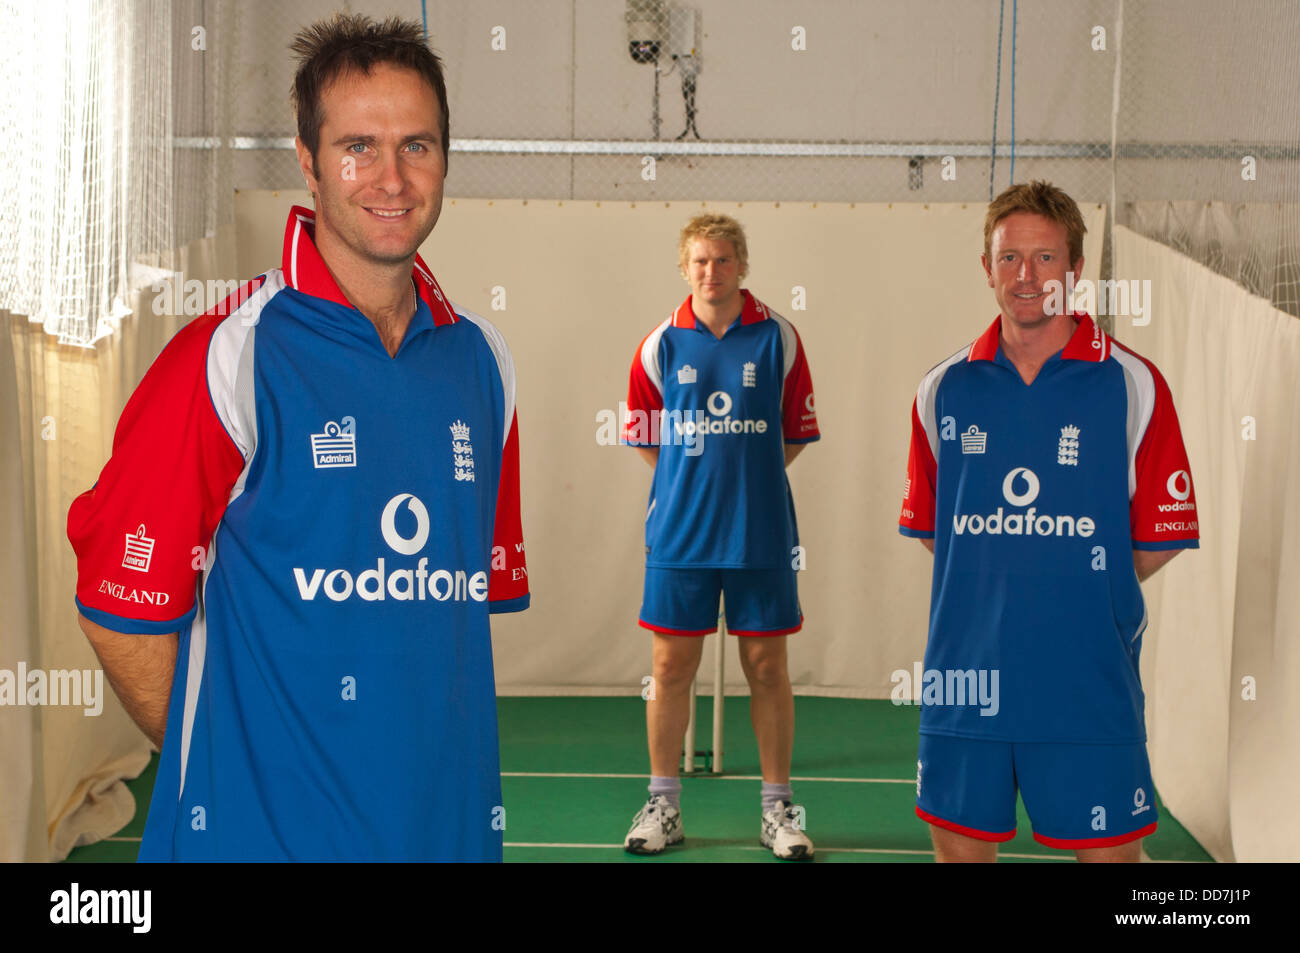 England cricketers Michael Vaughan, Matthew Hoggard and Paul Collingwood in Admiral cricket kit Stock Photo